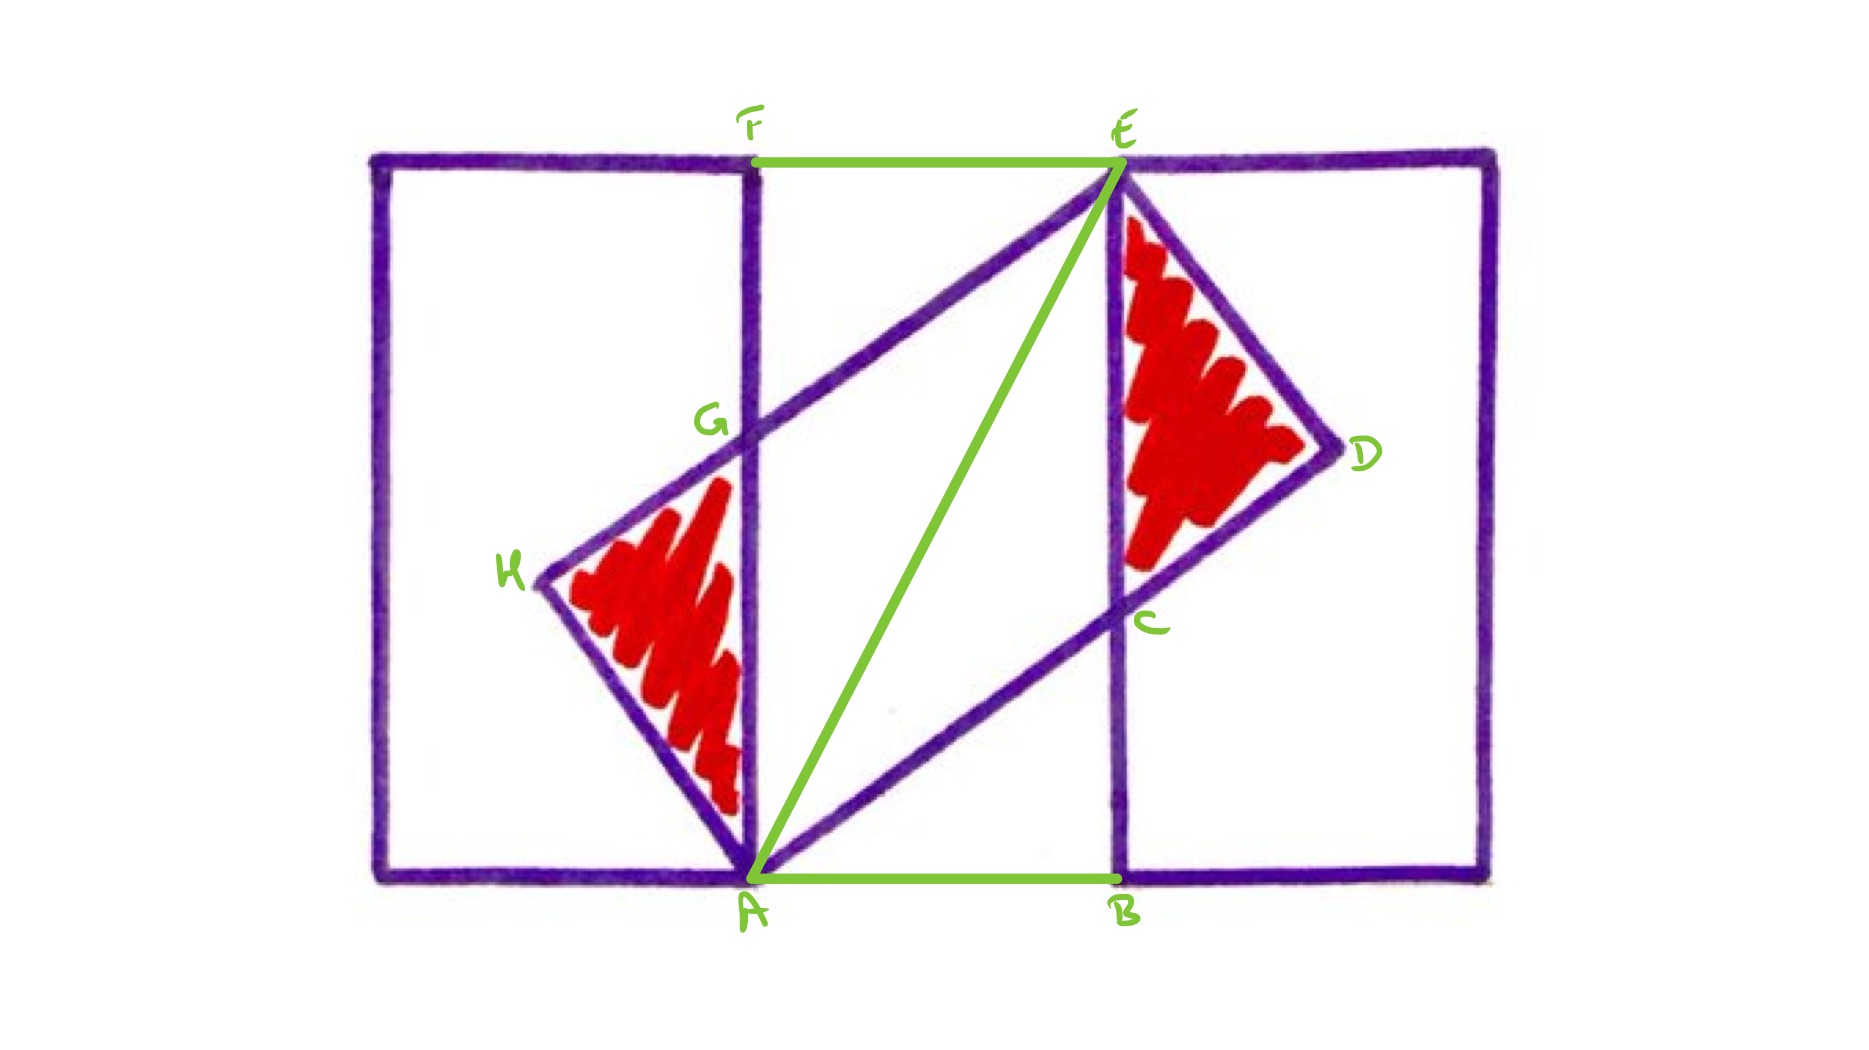 Three tilted rectangles labelled